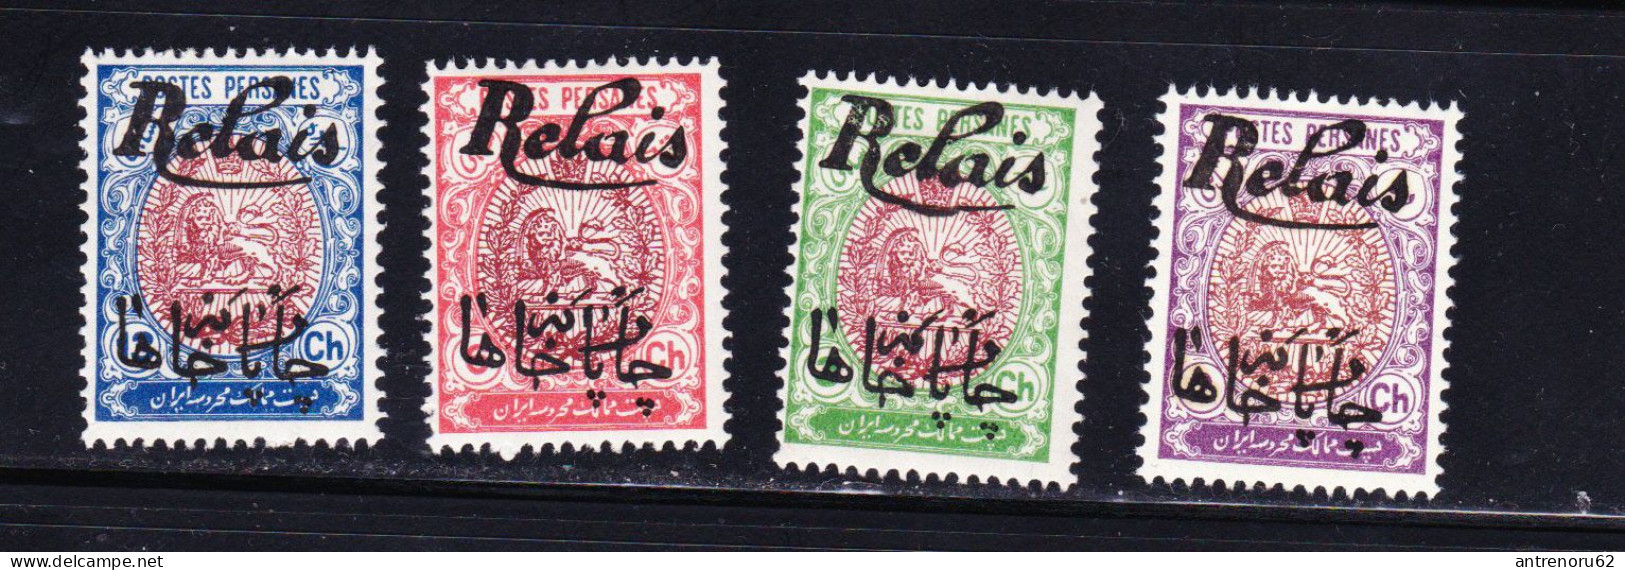 STAMPS-IRAN-1911-STAMPS-UNUSED-MH*-SEE-SCAN-OVERPRINT - Iran